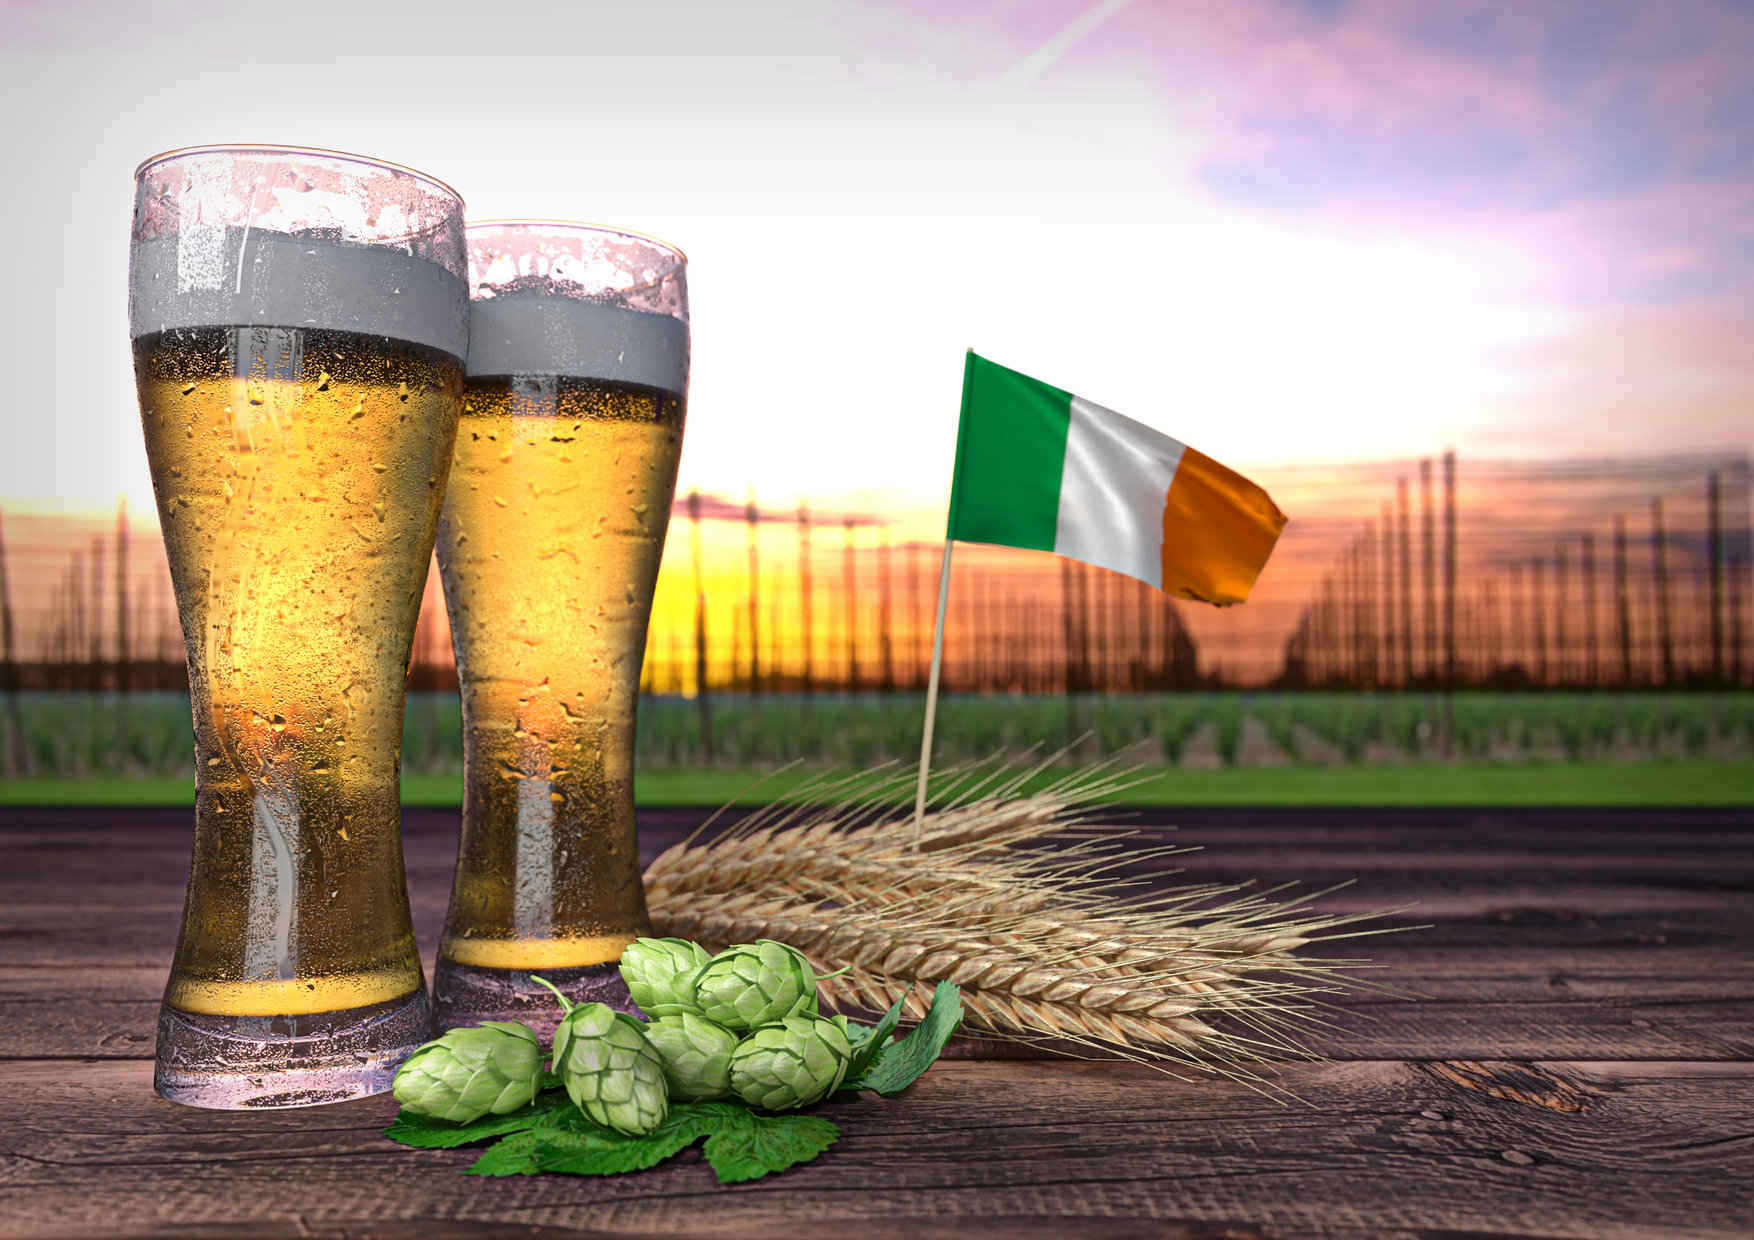 The Public Health (Alcohol) Bill contains a series of punitive measures that would make Ireland amongst the most restricted countries in the world in terms of marketing freedoms for alcoholic products.